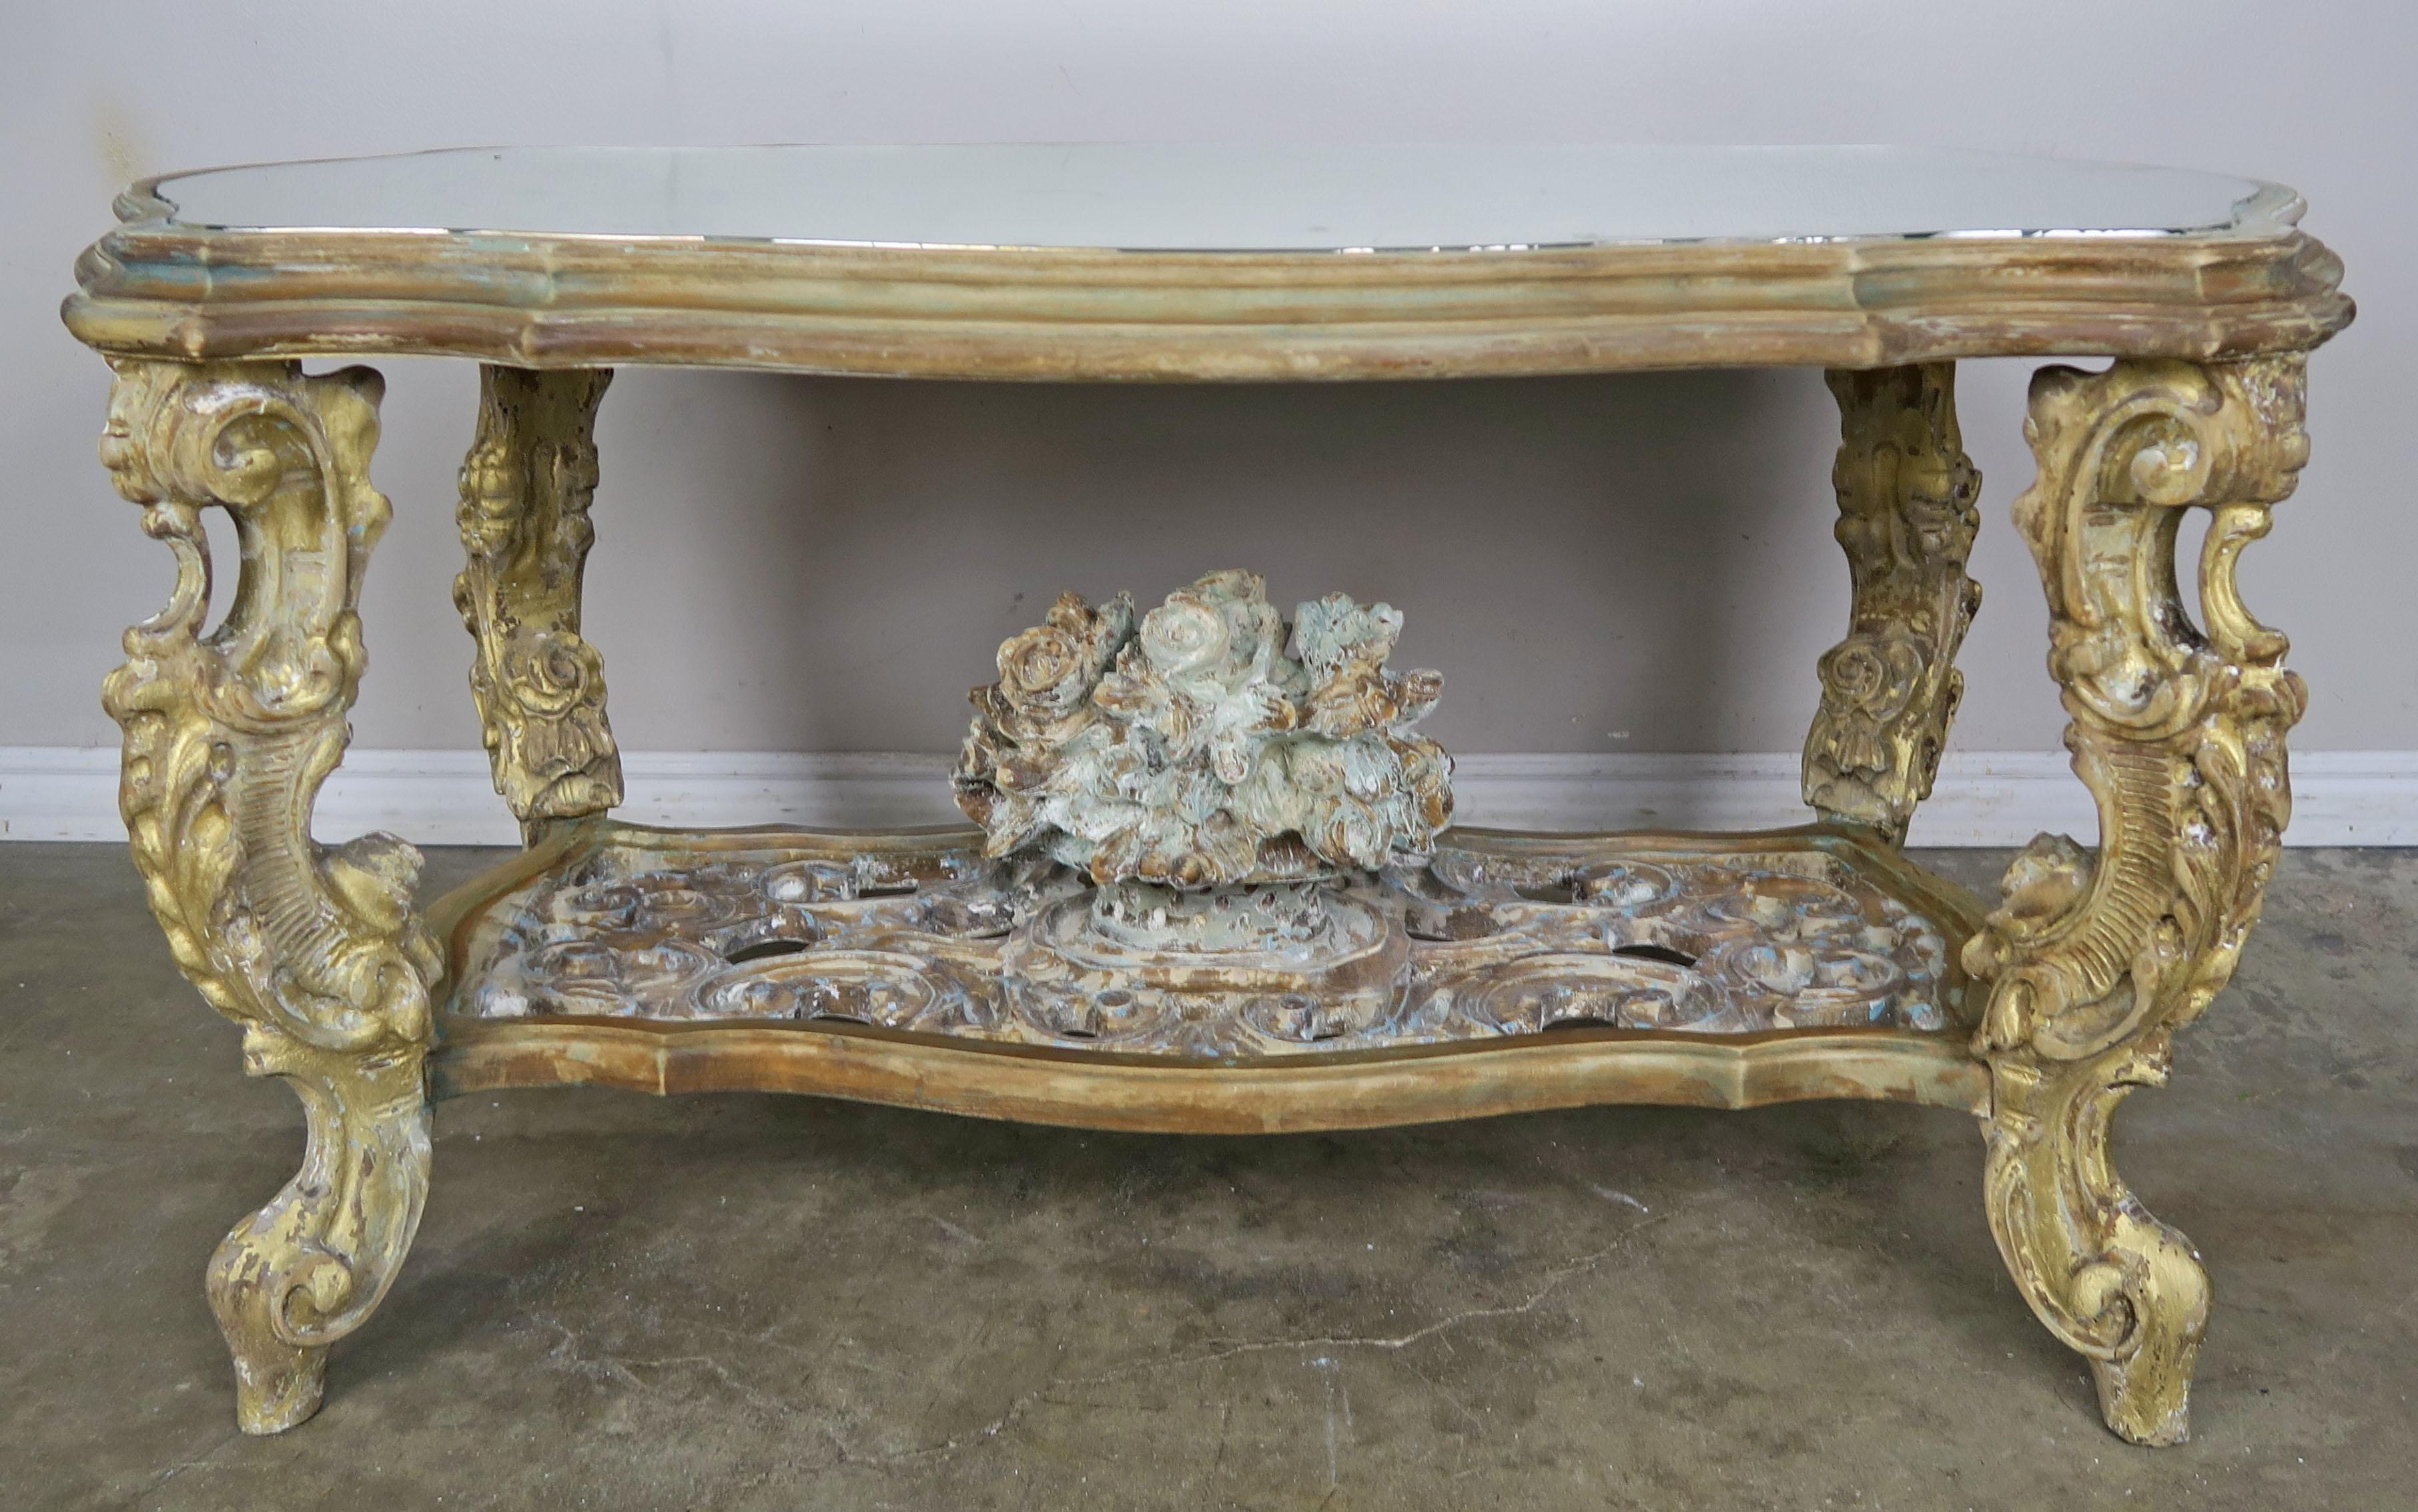 Carved French painted Rococo style tea table with silvered mirror top. The table stands on four ornately carved cabriole shaped legs and depicts a basket of roses on a beautiful carved wood scrolled base. Unique shaped silver leaf mirrored top.